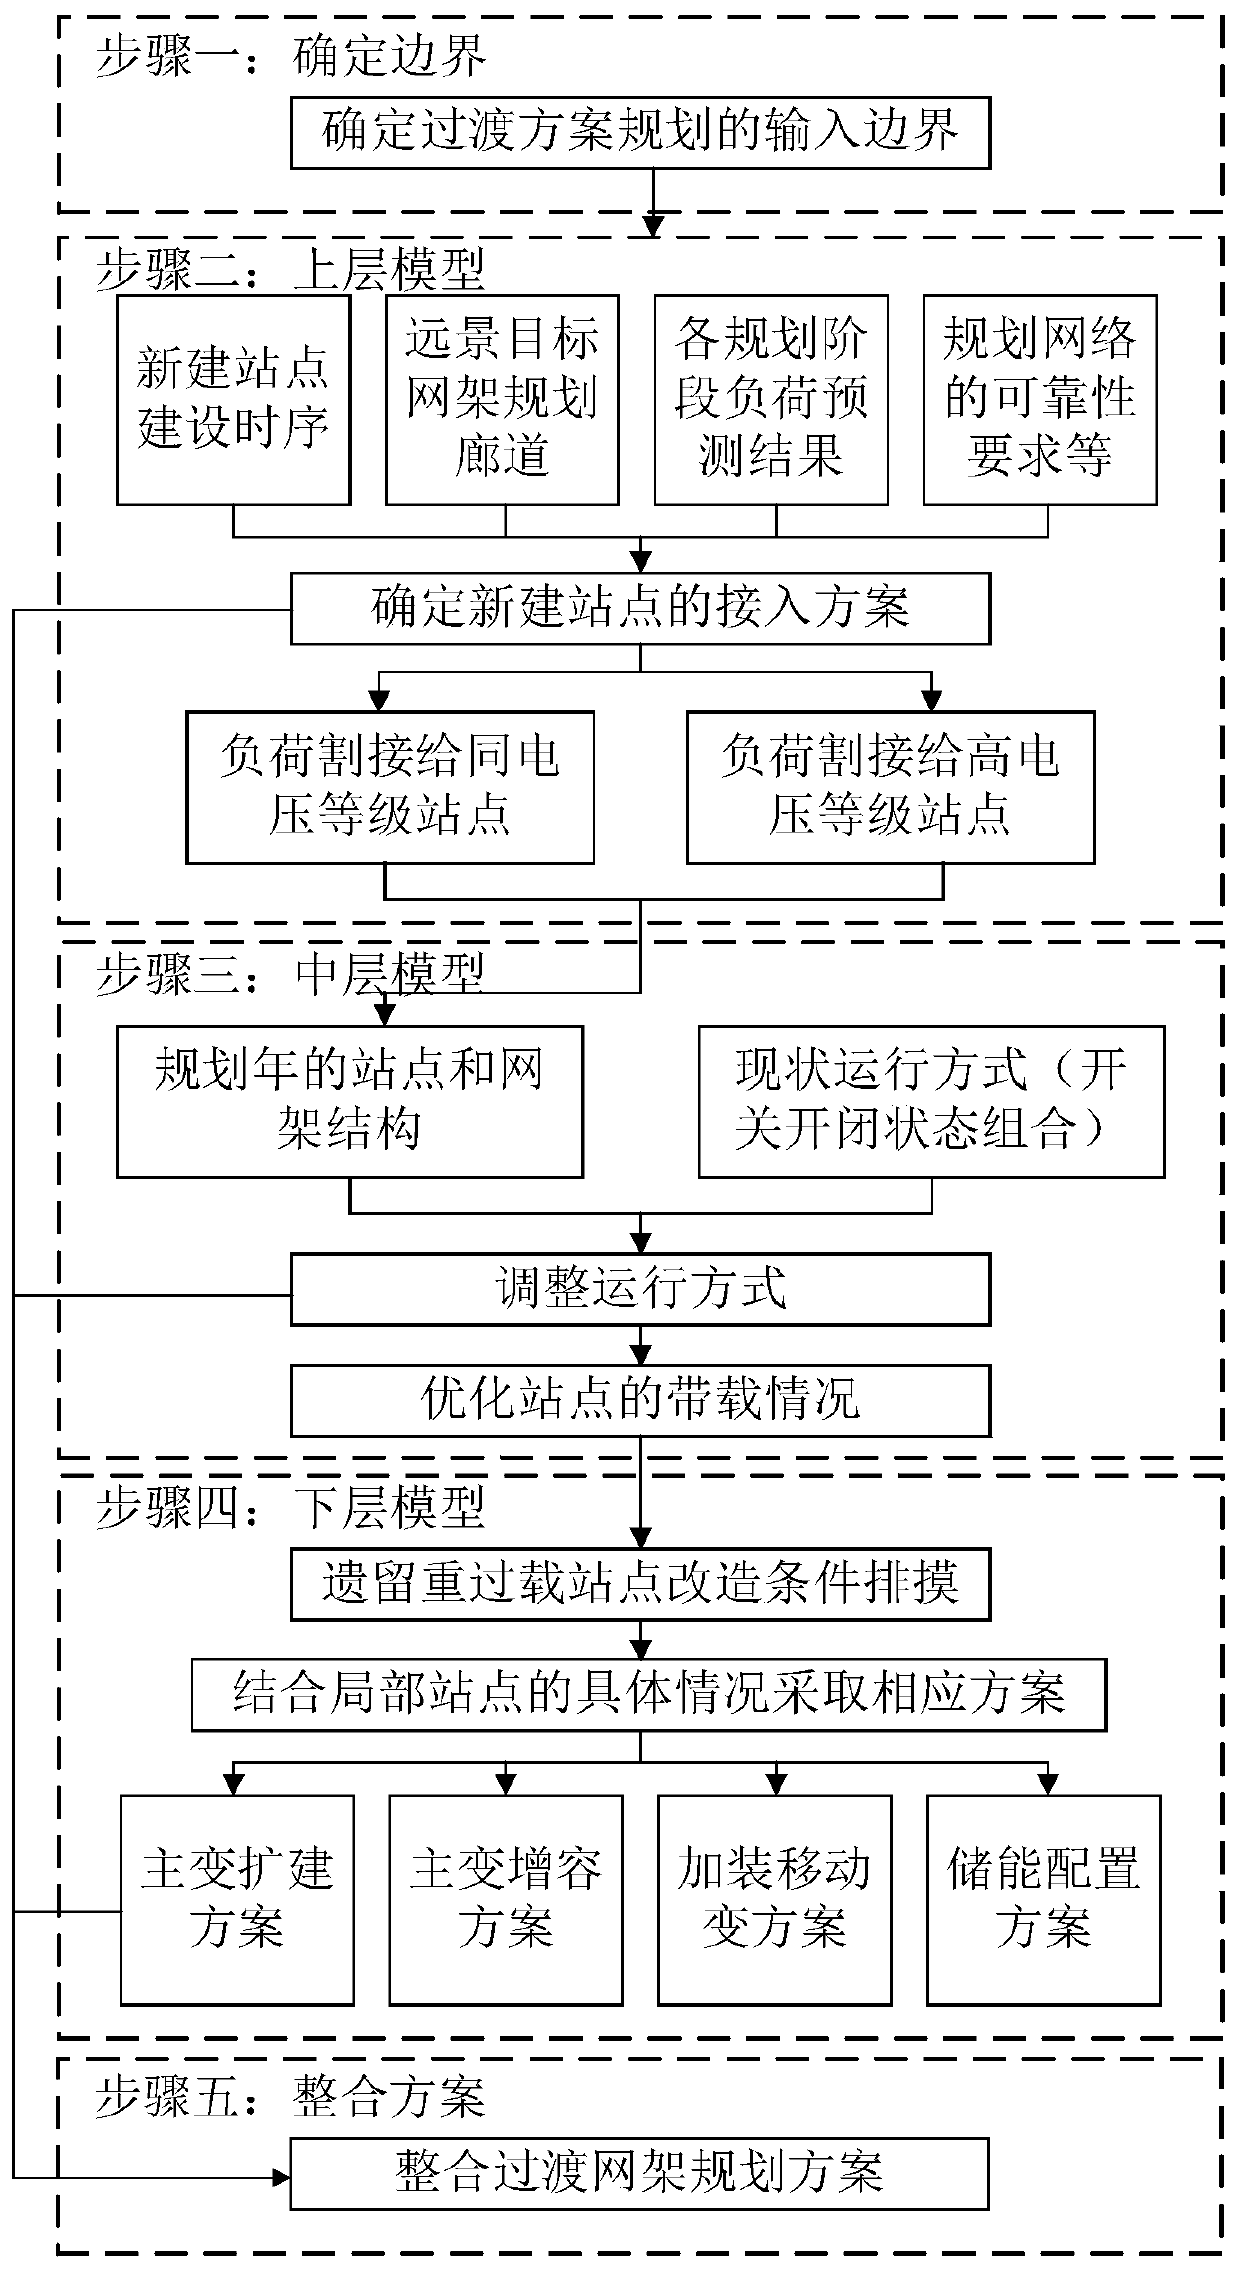 Computer-aided planning method based on three-layer planning model of power distribution network transition scheme